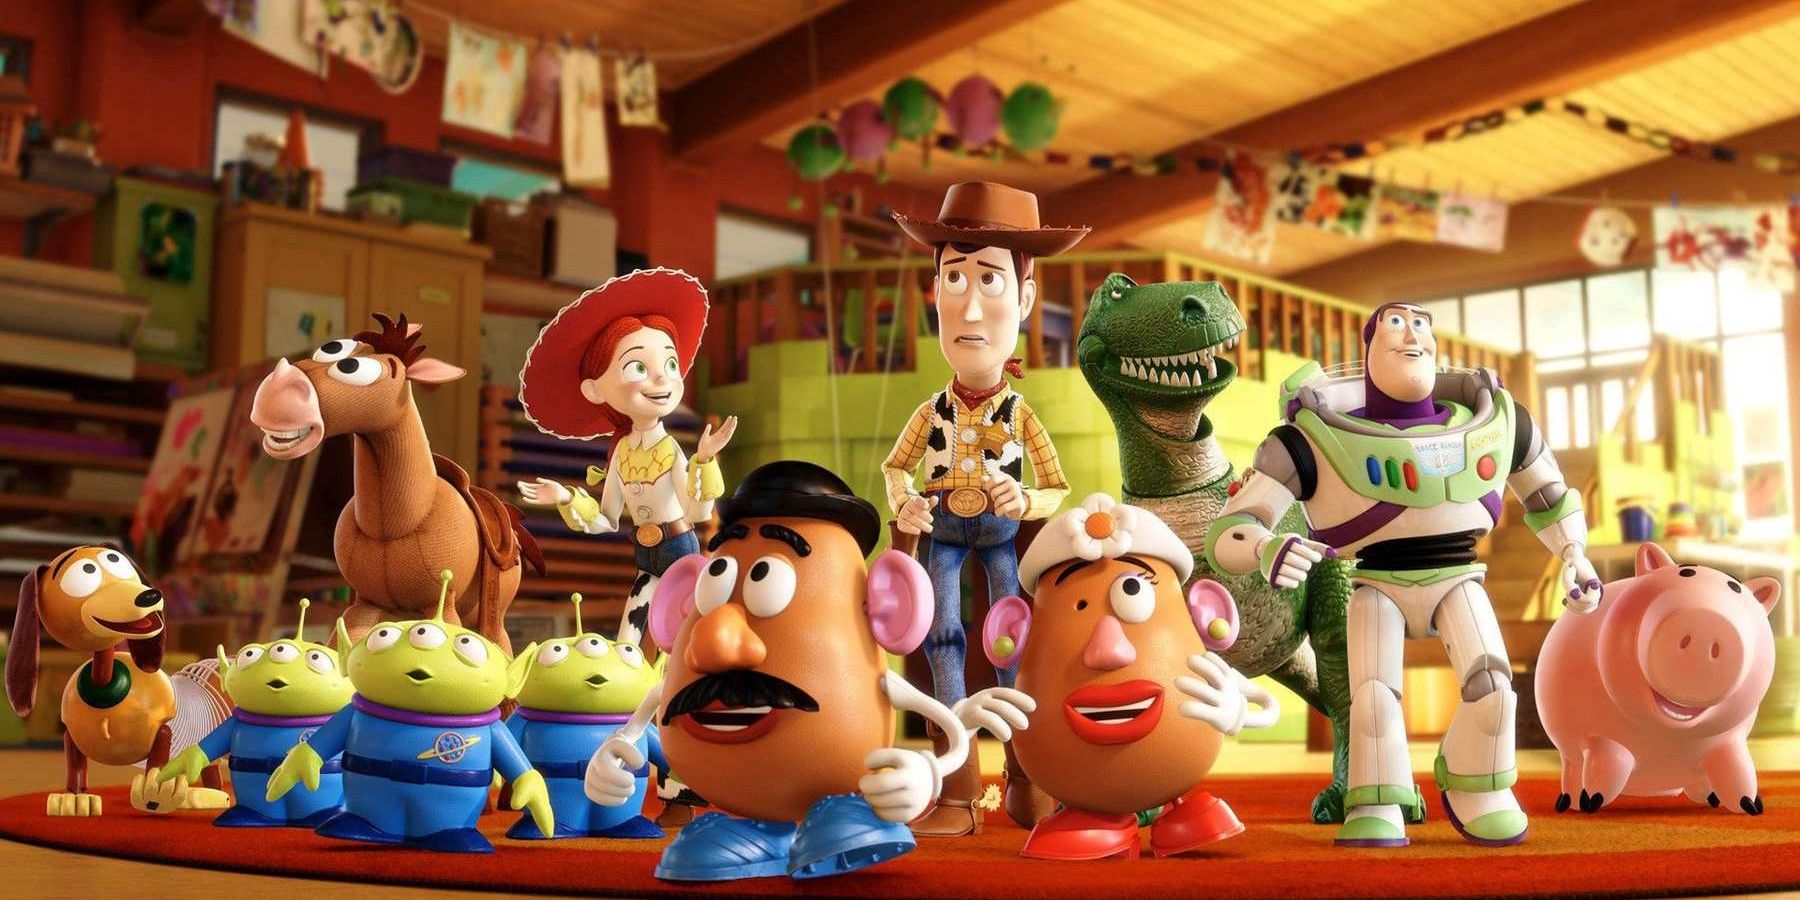 Every Pixar Movie Ranked From Worst To Best (Including Luca)